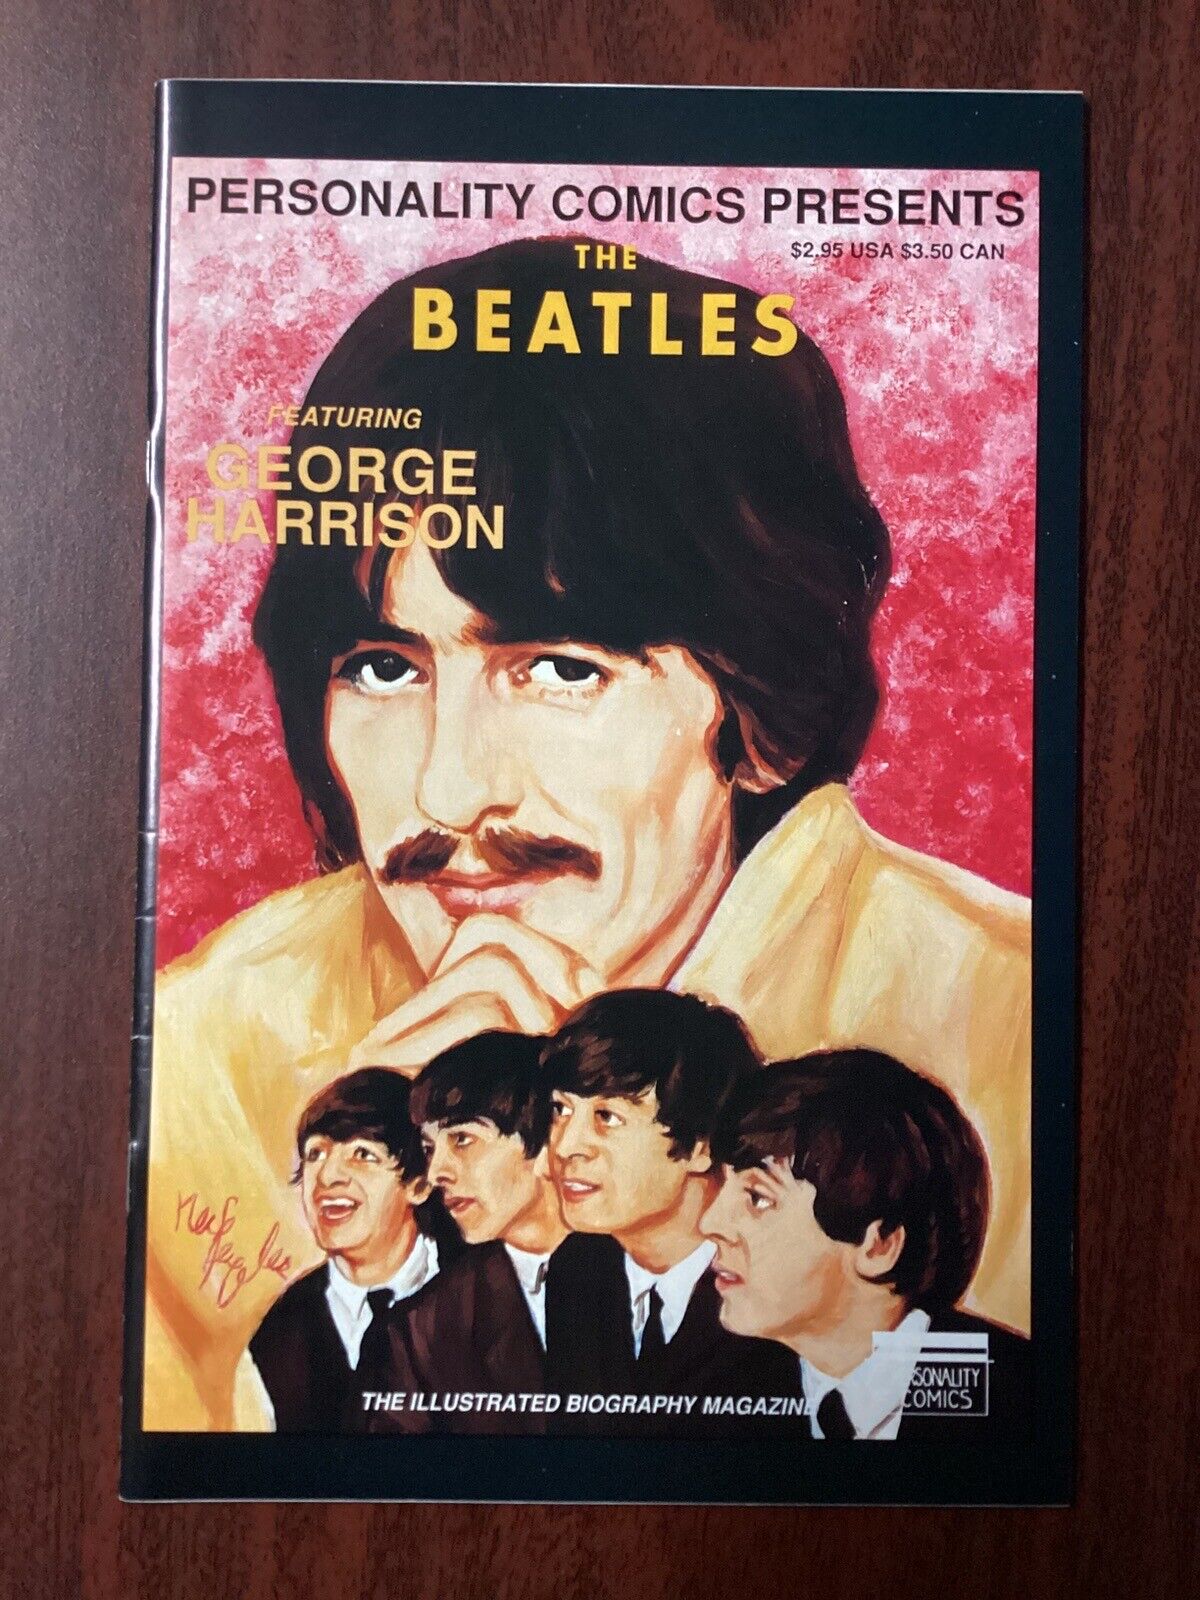 Personality Comics Presents The Beatles Featuring George Harrison 1992